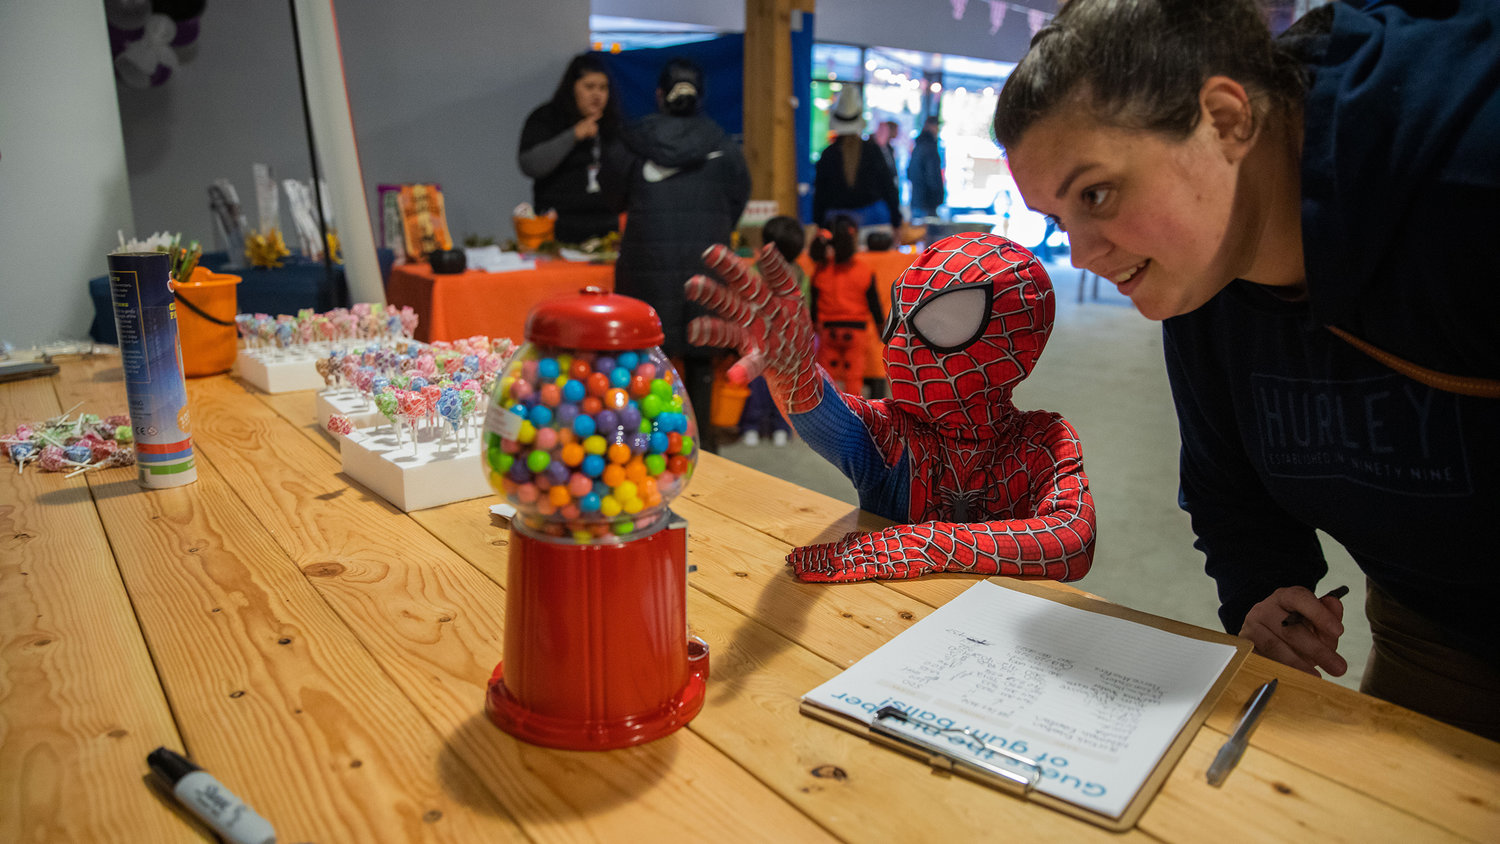 Spidey-Sense is used in guessing the number of gum balls in a dispenser during a Halloween Carnival at The White Space in downtown Centralia on Monday.